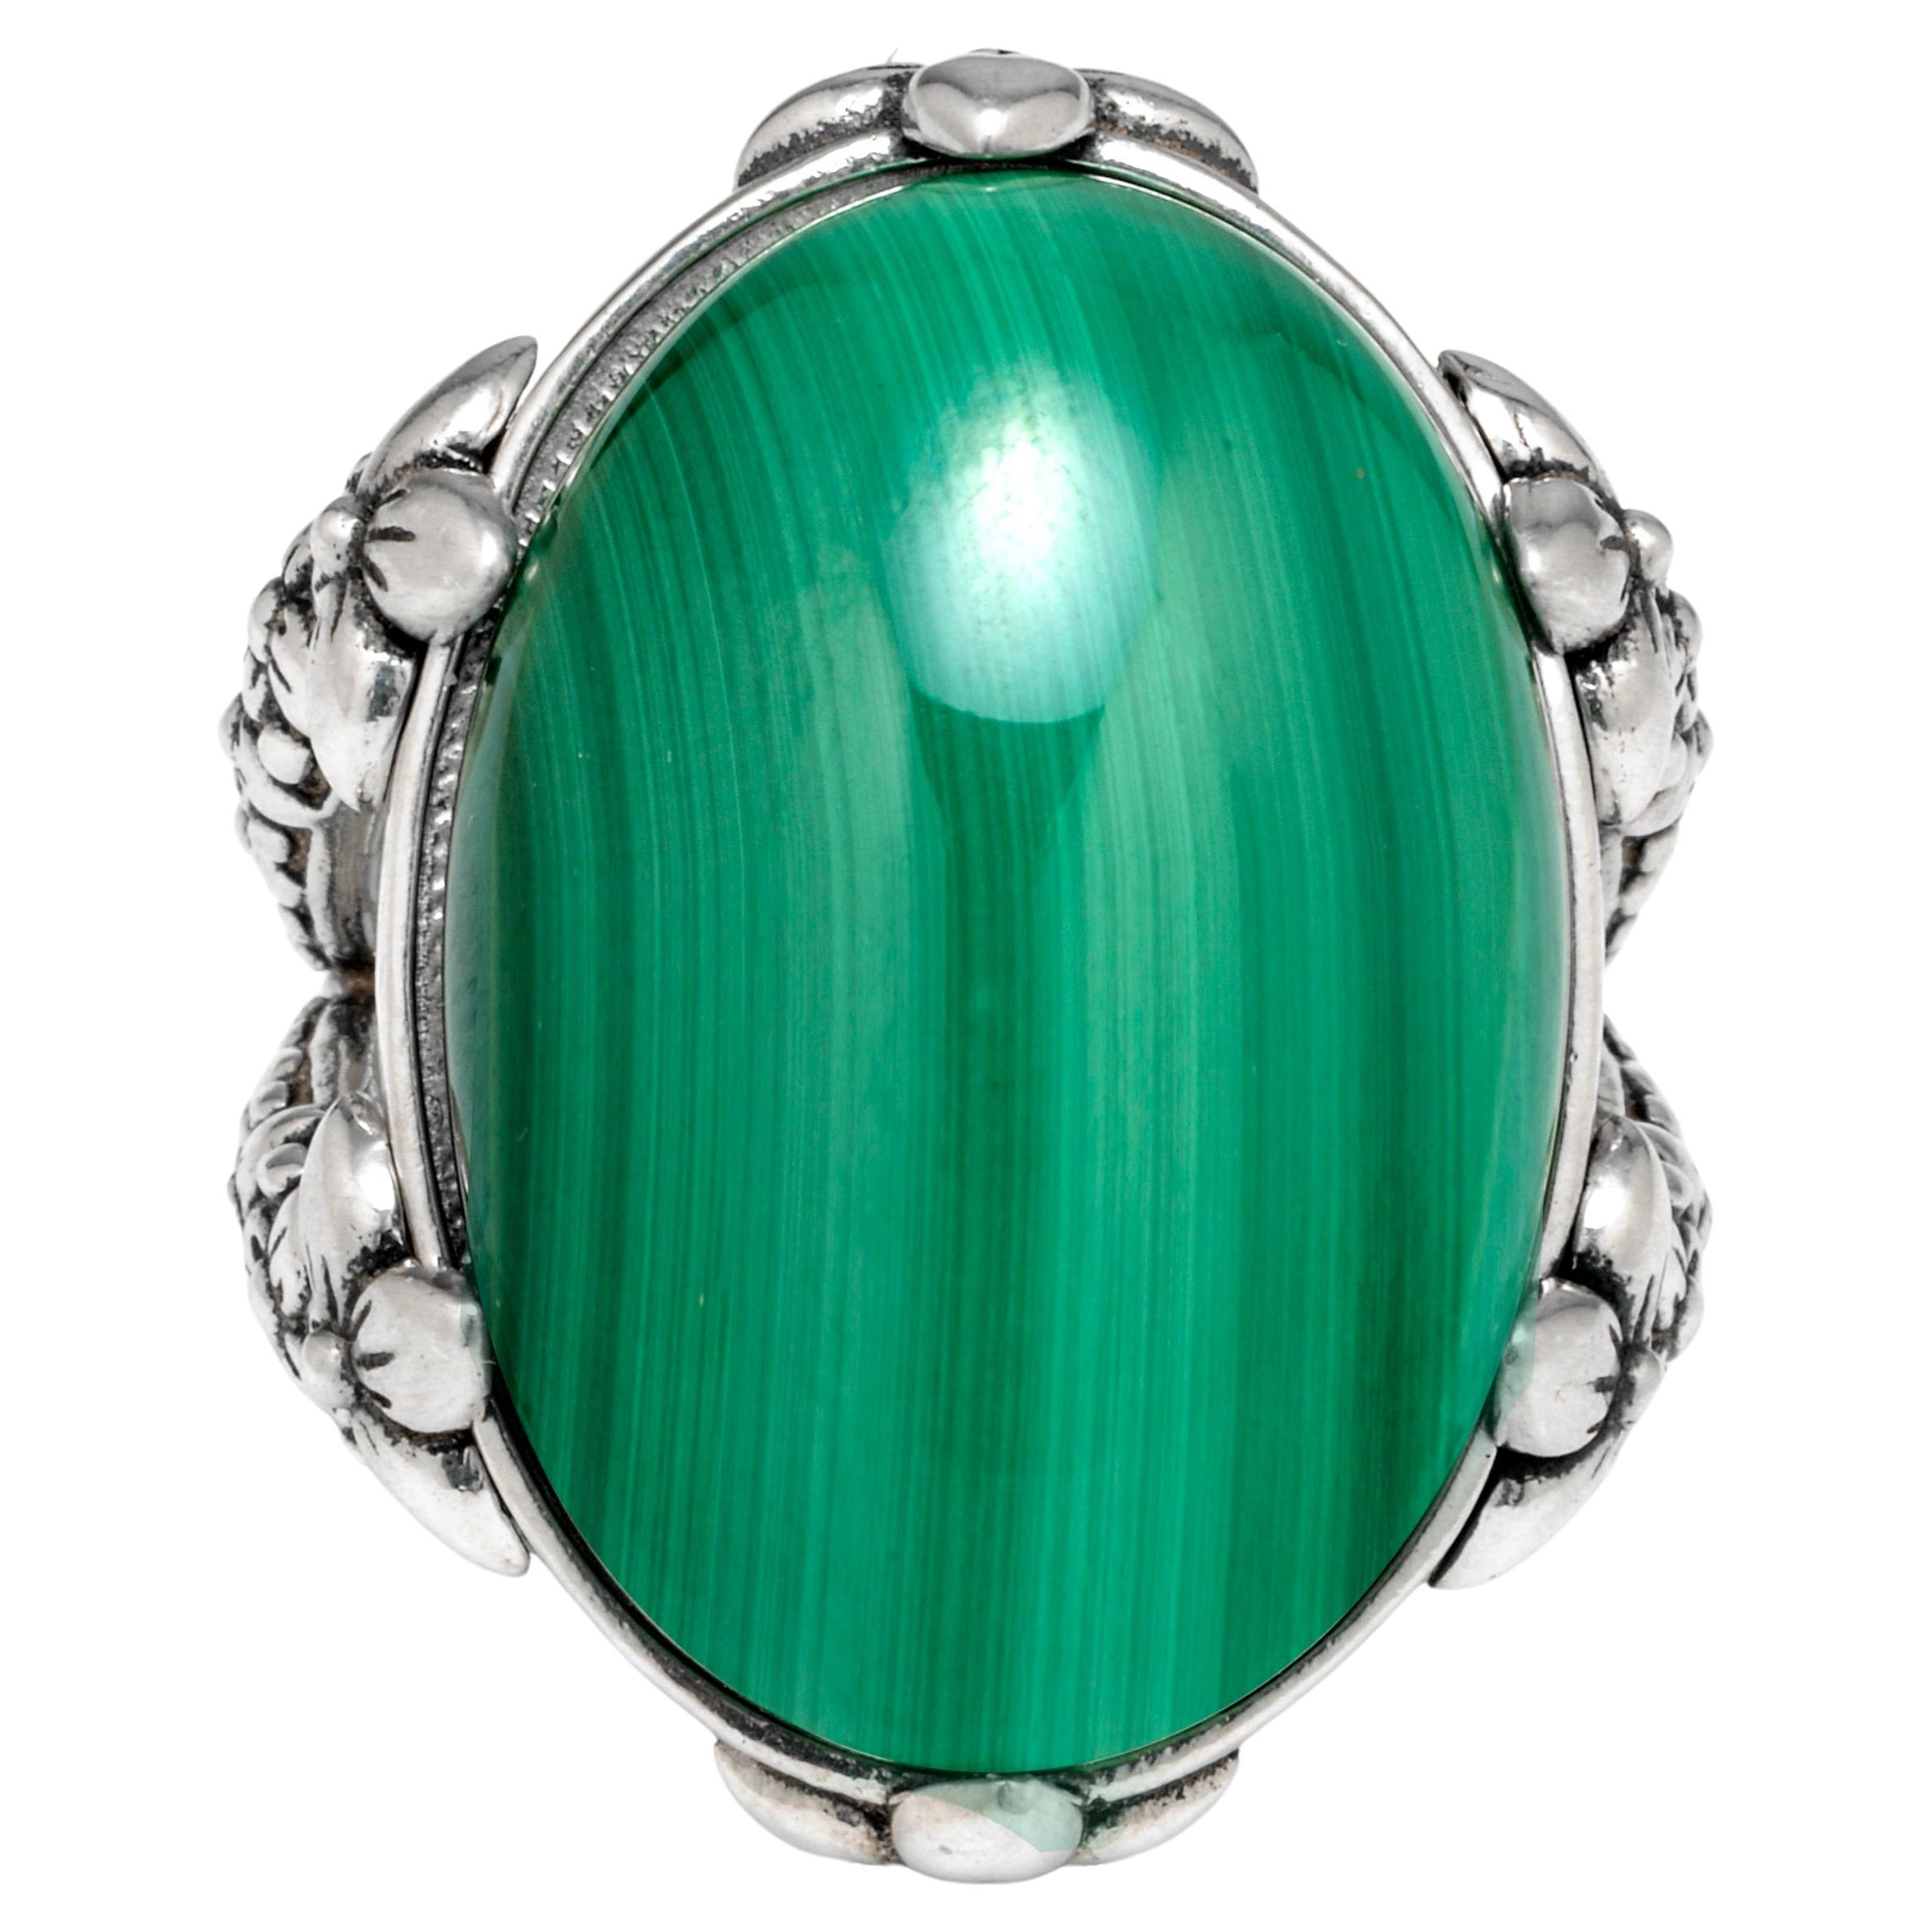 Stephen Dweck Sterling Silver And Malachite Ring Sz 7